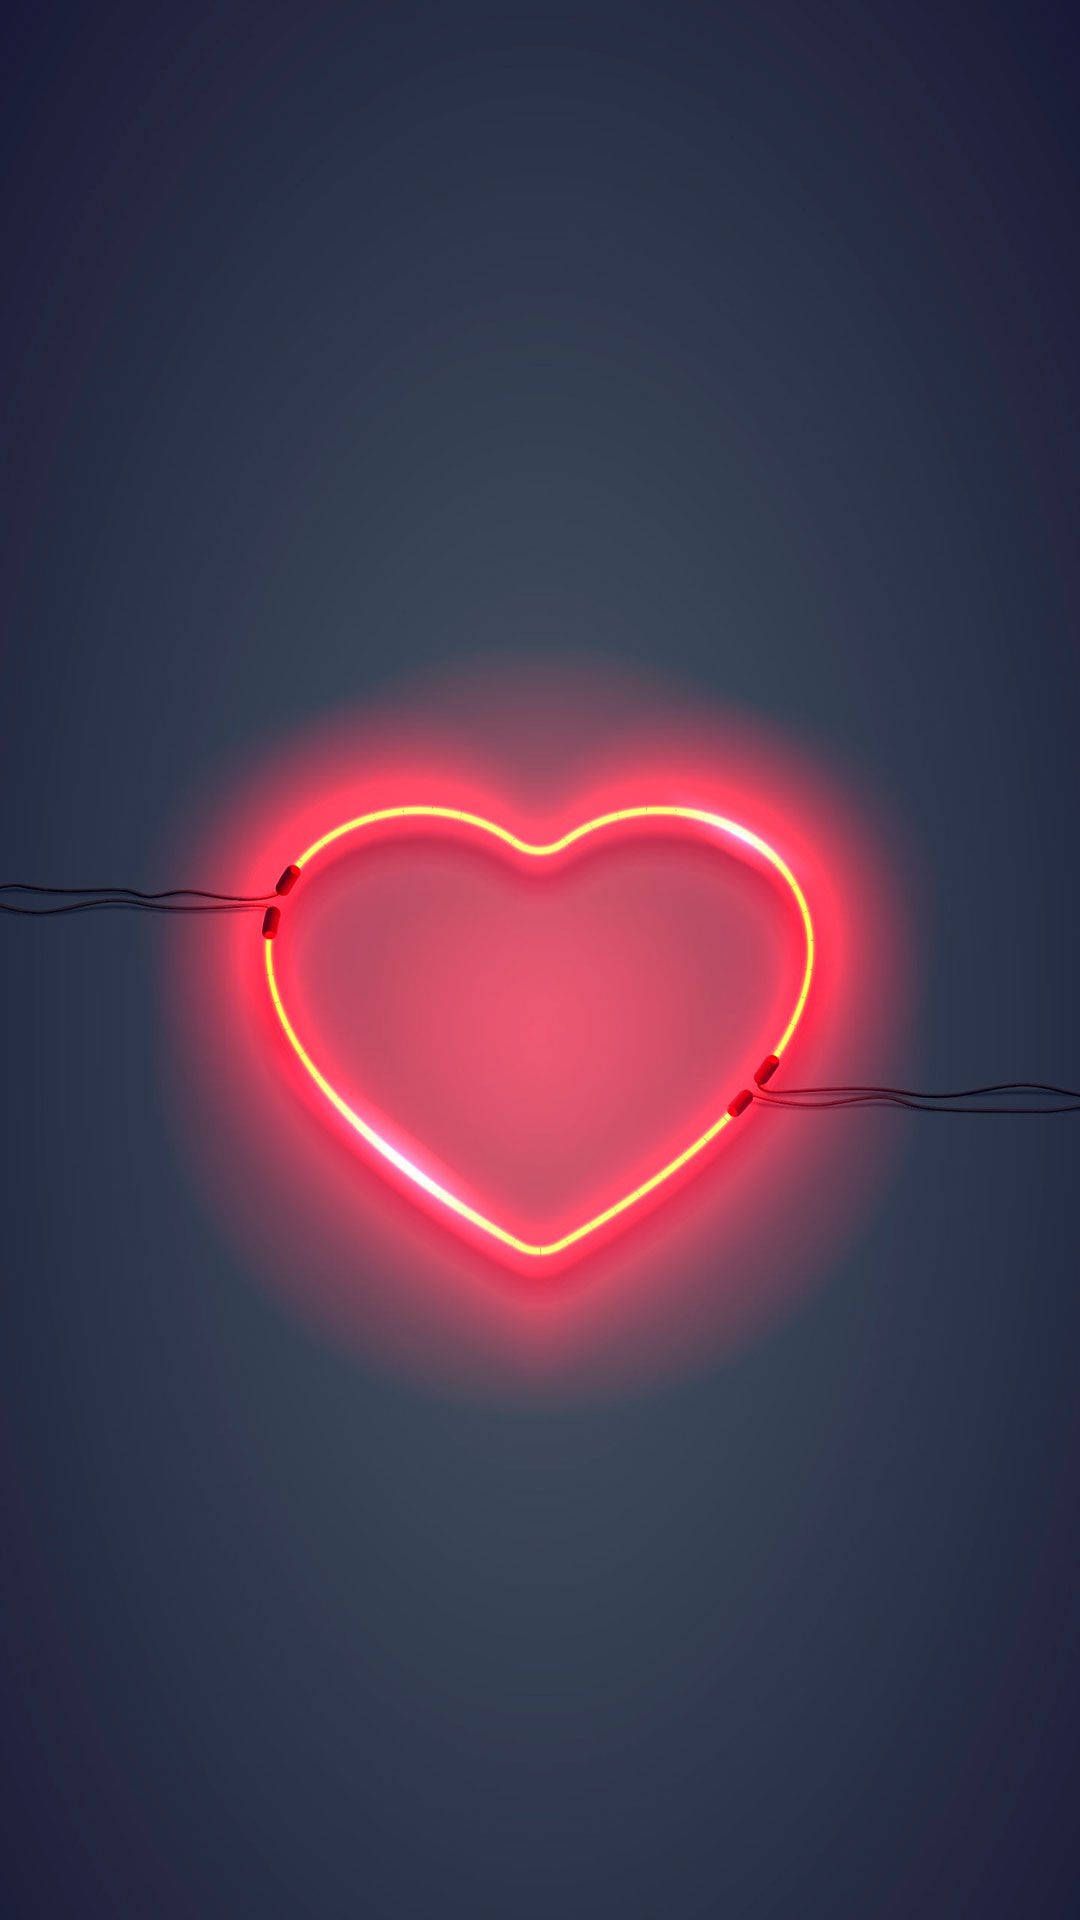 Neon heart wallpaper for your phone - Heart